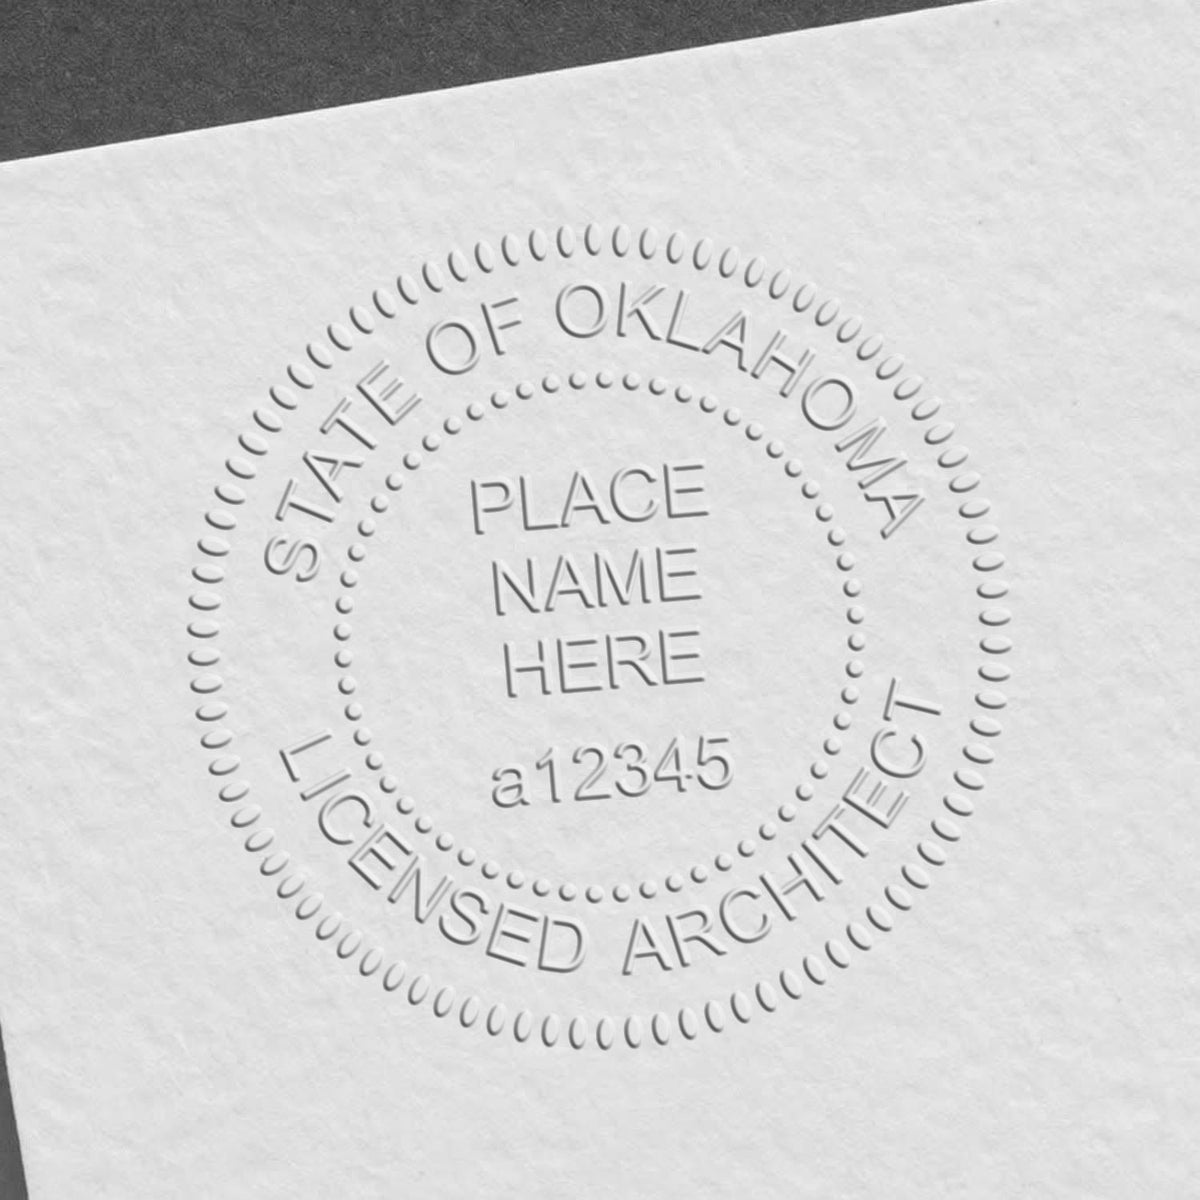 The State of Oklahoma Architectural Seal Embosser stamp impression comes to life with a crisp, detailed photo on paper - showcasing true professional quality.